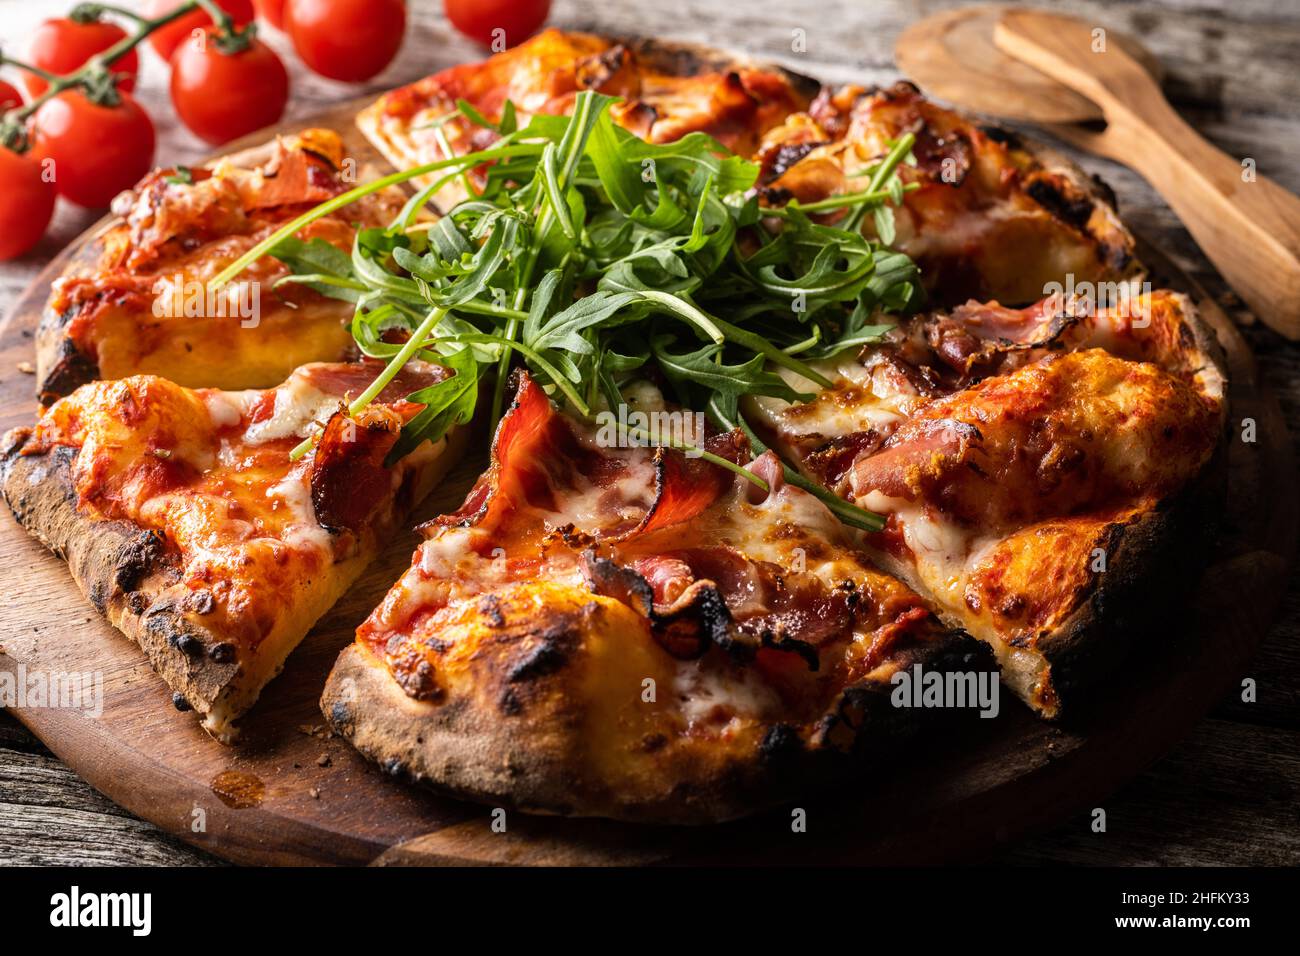 Wood-fired stone baked Pizza Stock Photo